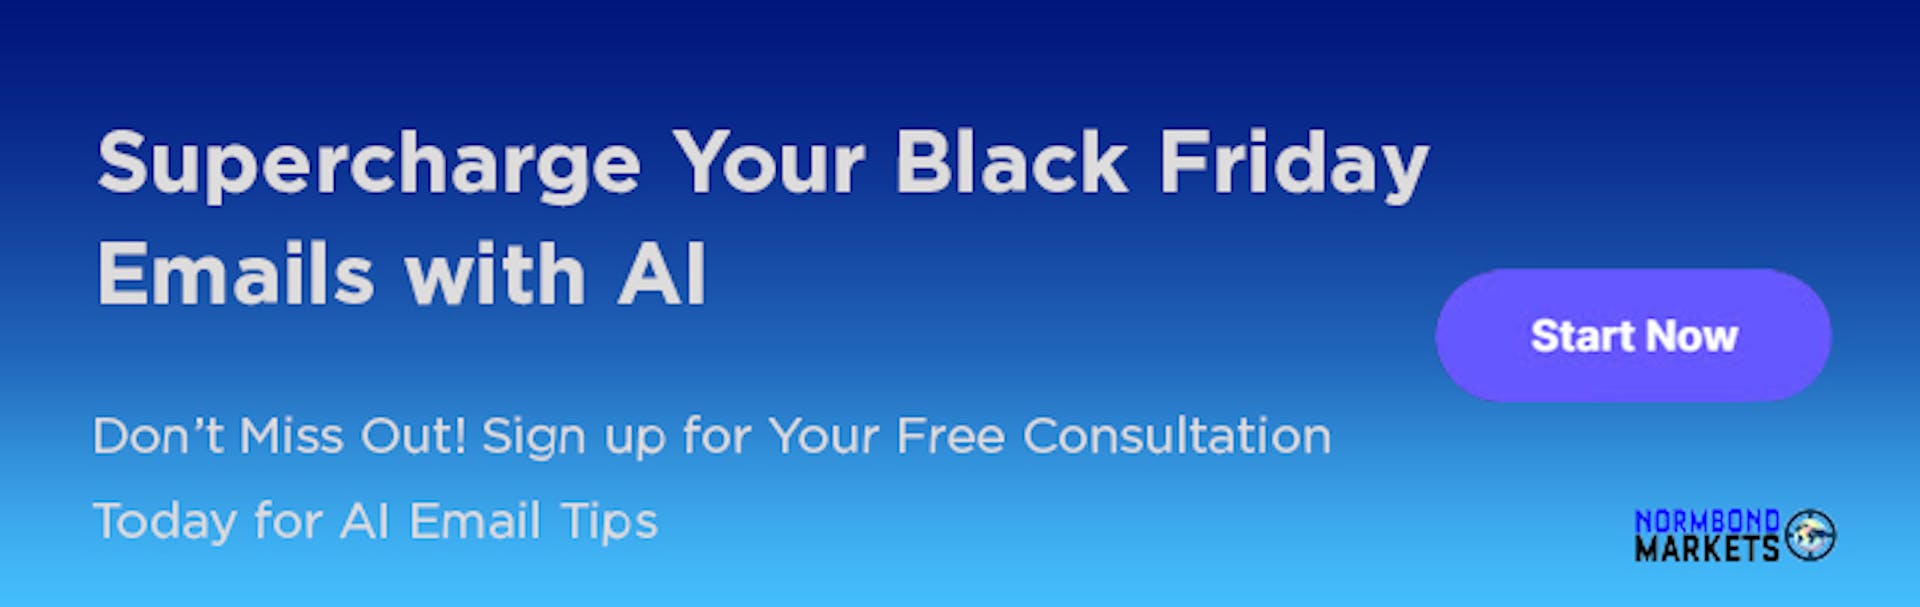 Create Emails with AI for Black Friday marketing